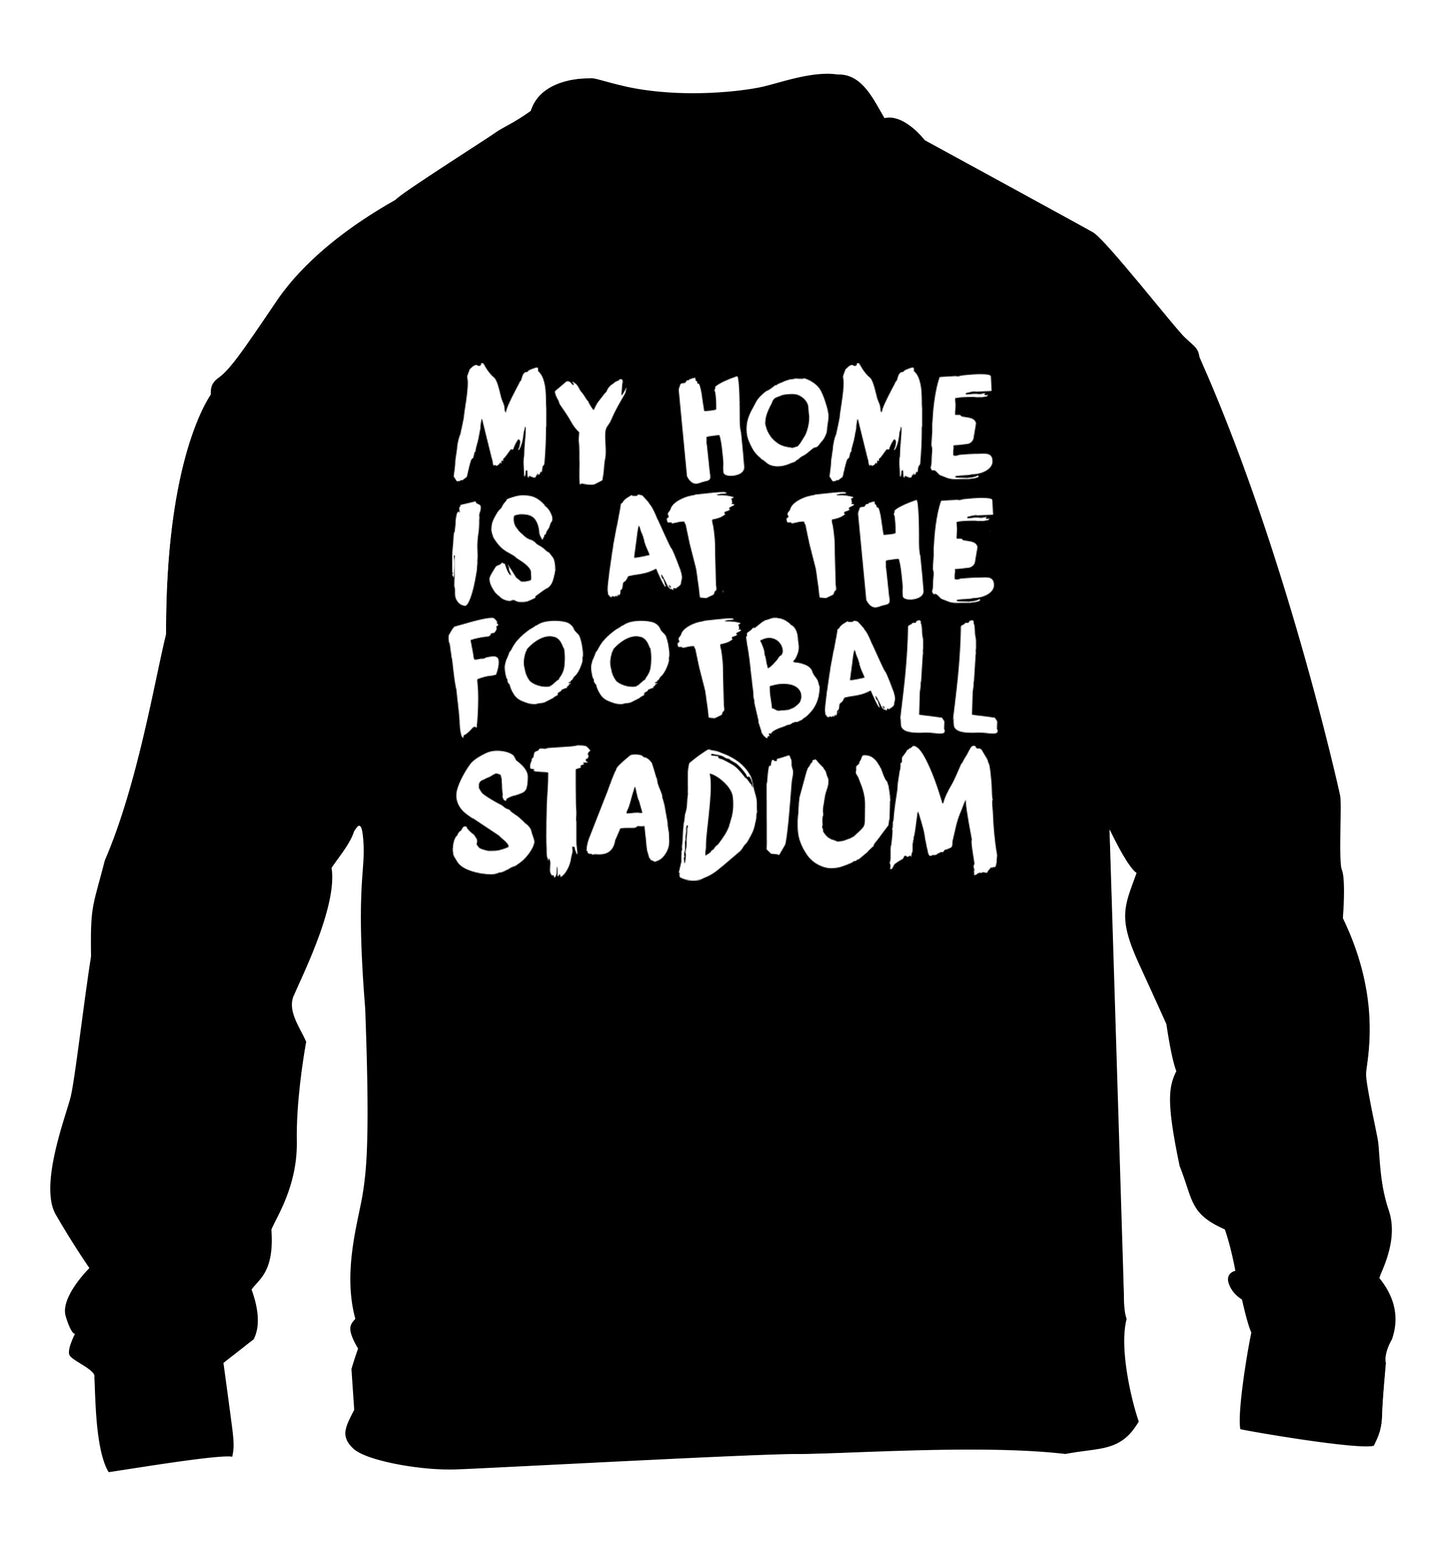 My home is at the football stadium children's black sweater 12-14 Years